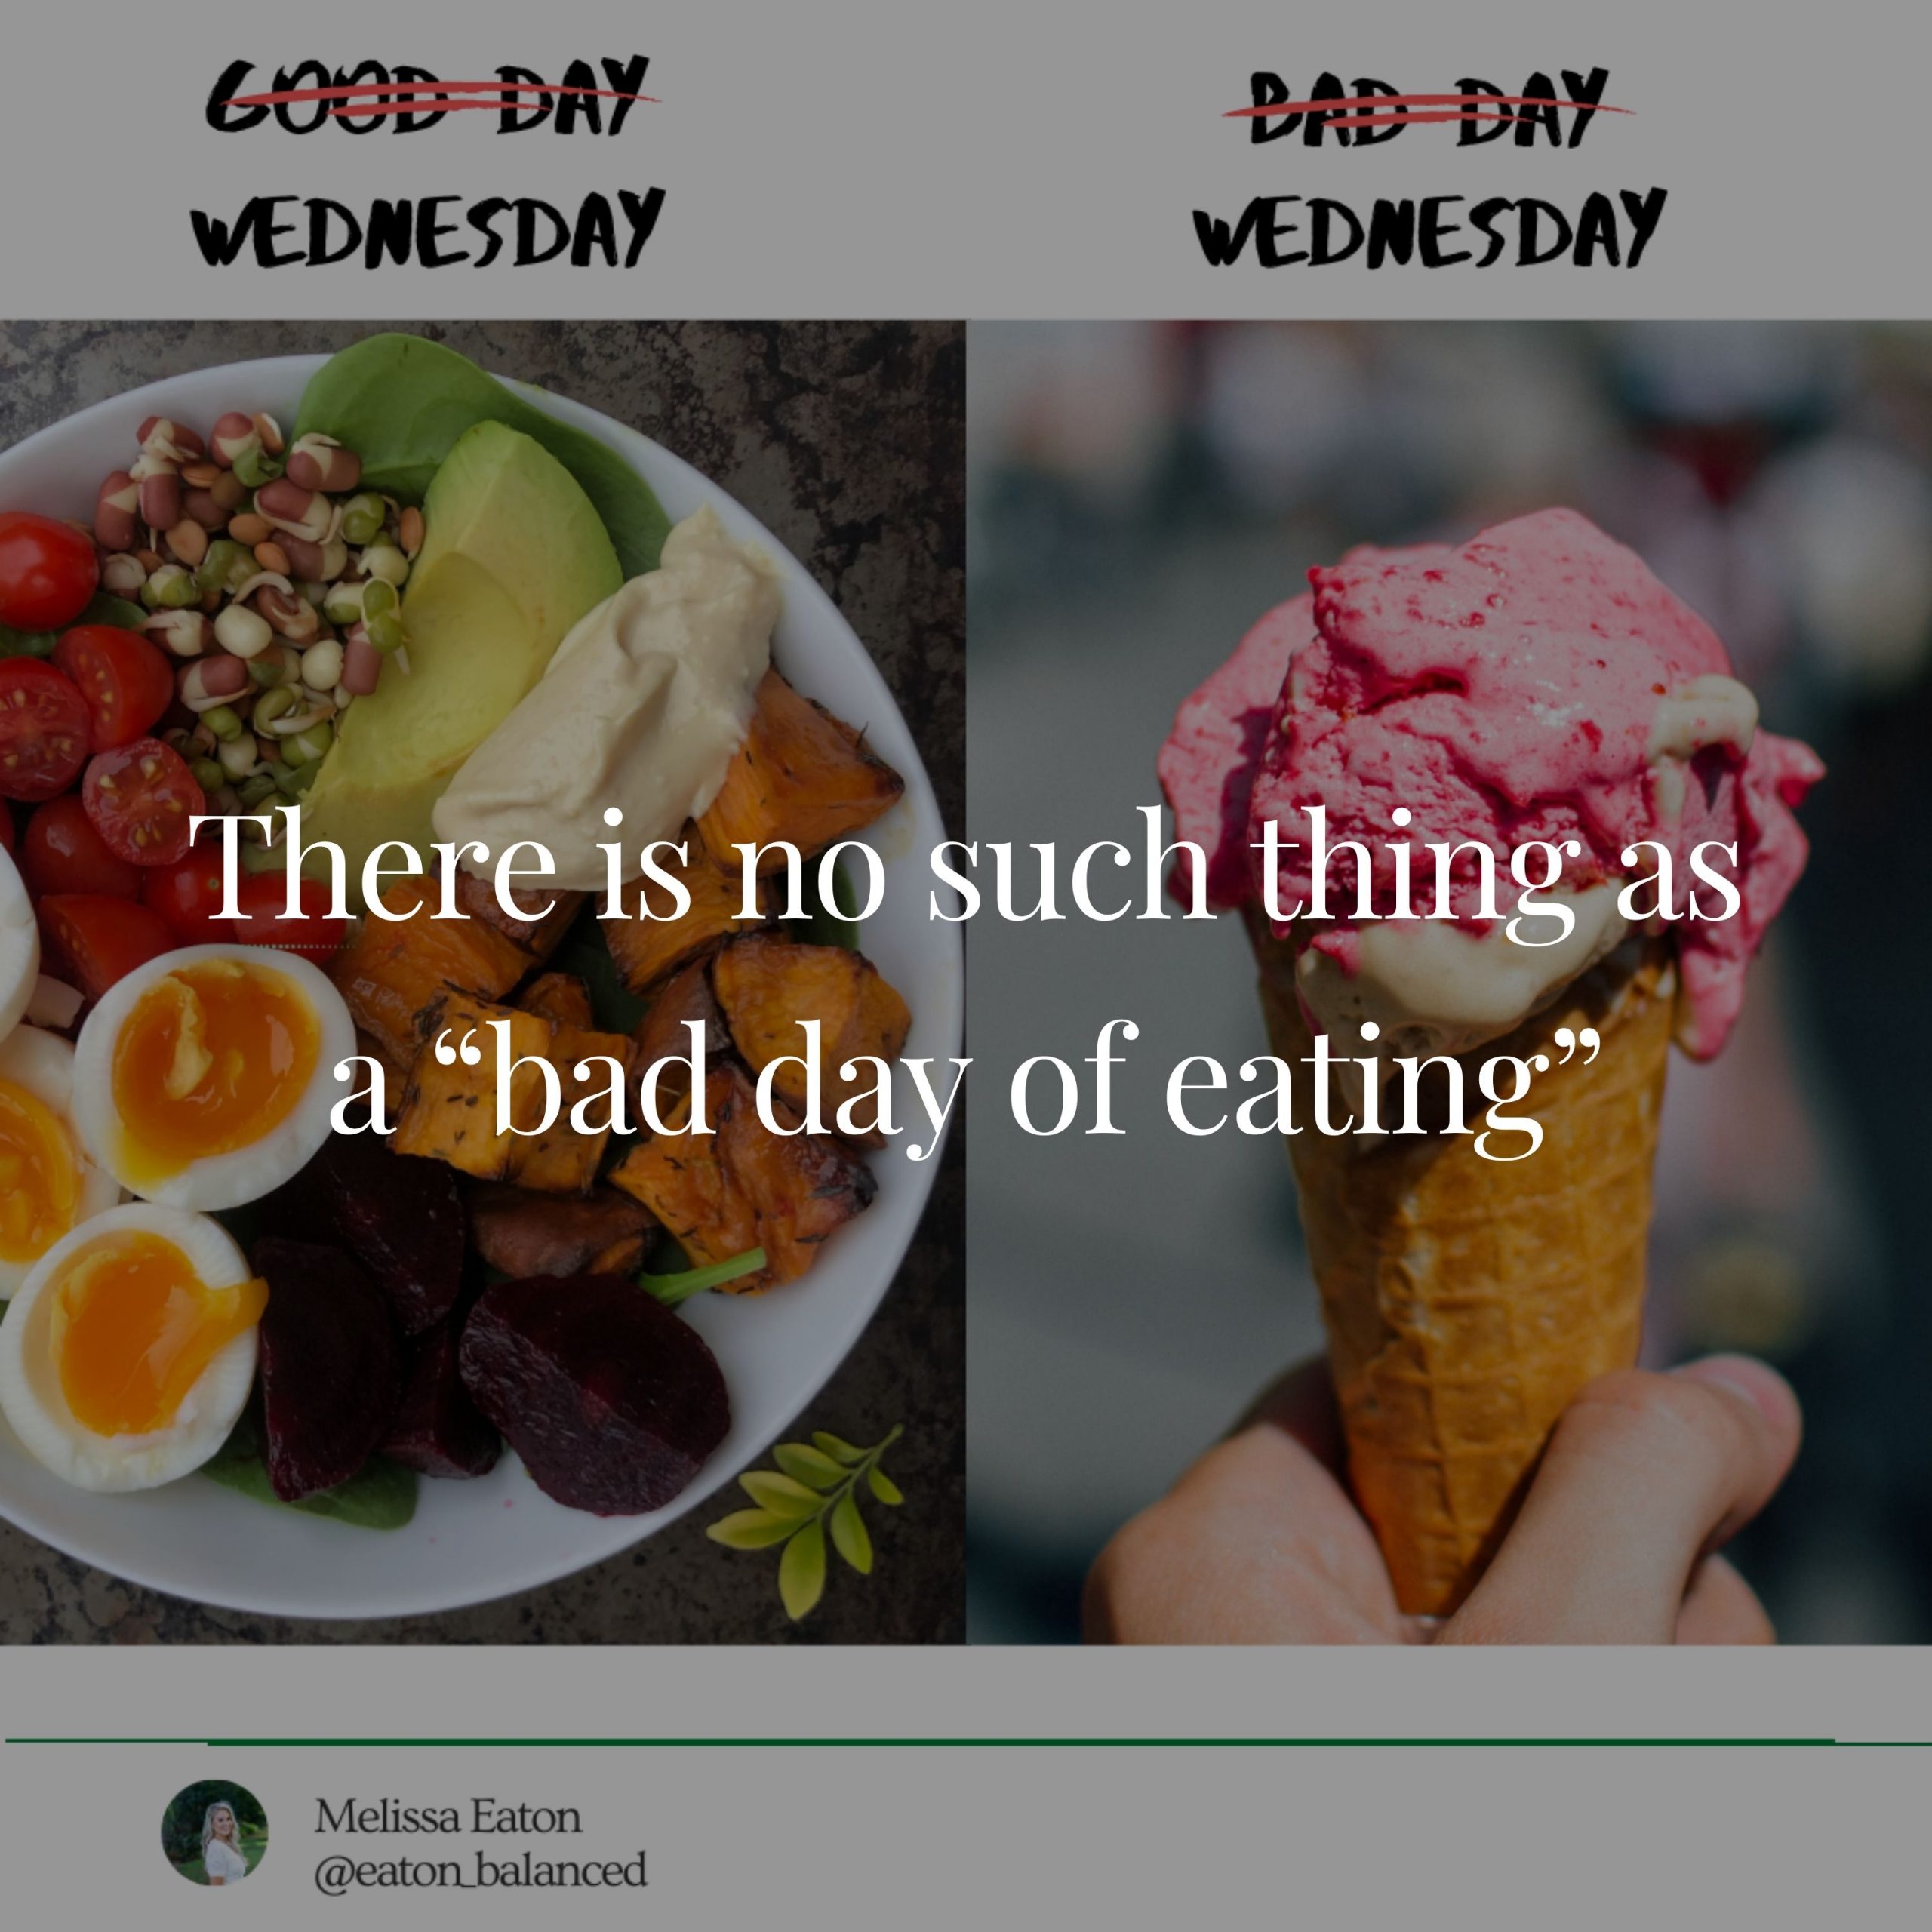 There is no such thing as a “bad day of eating”